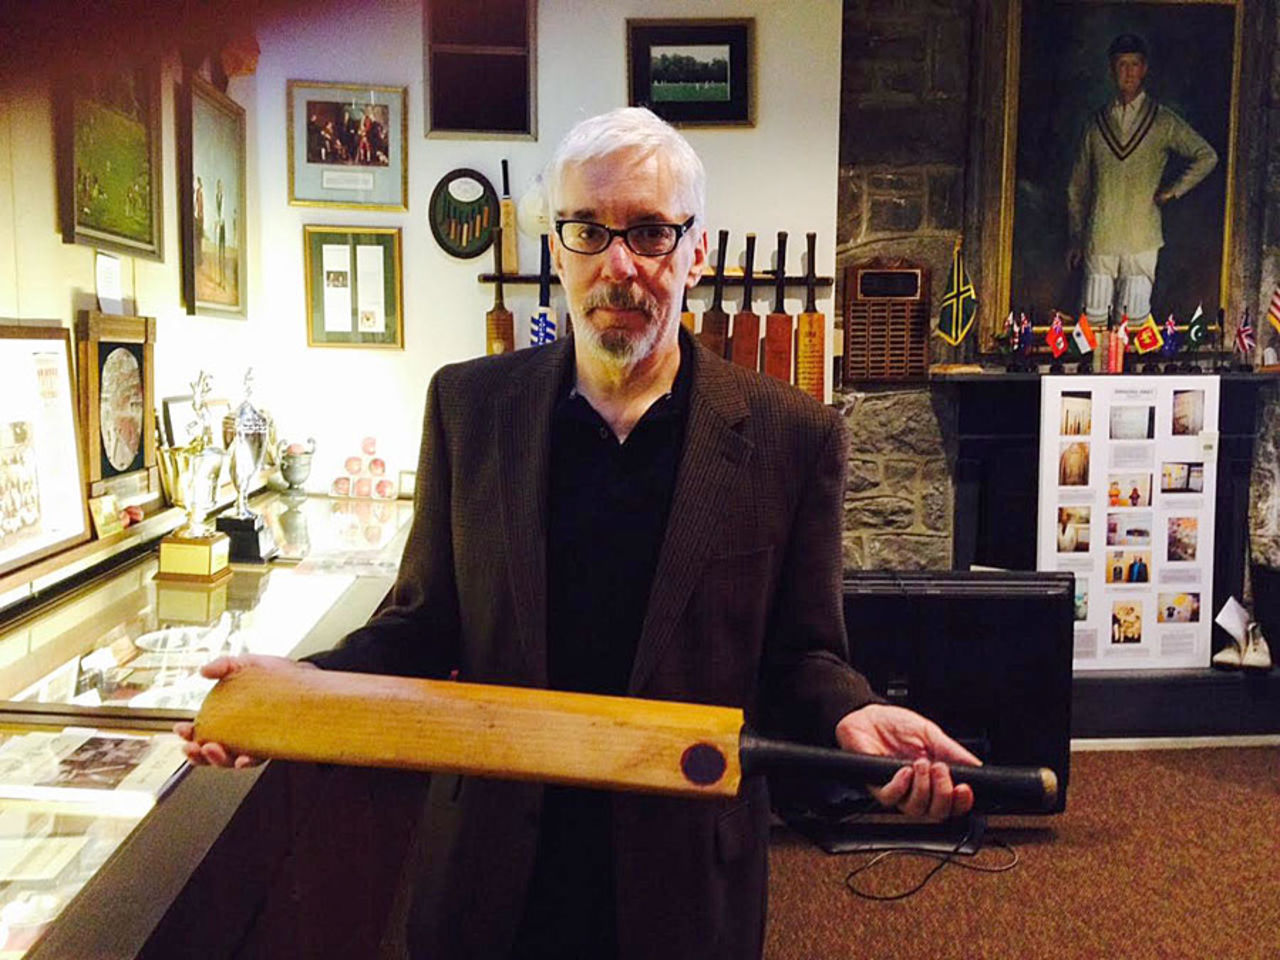 Dave Roberts poses with an bat of Don Bradman's, Haverford, Pennsylvania, 2015